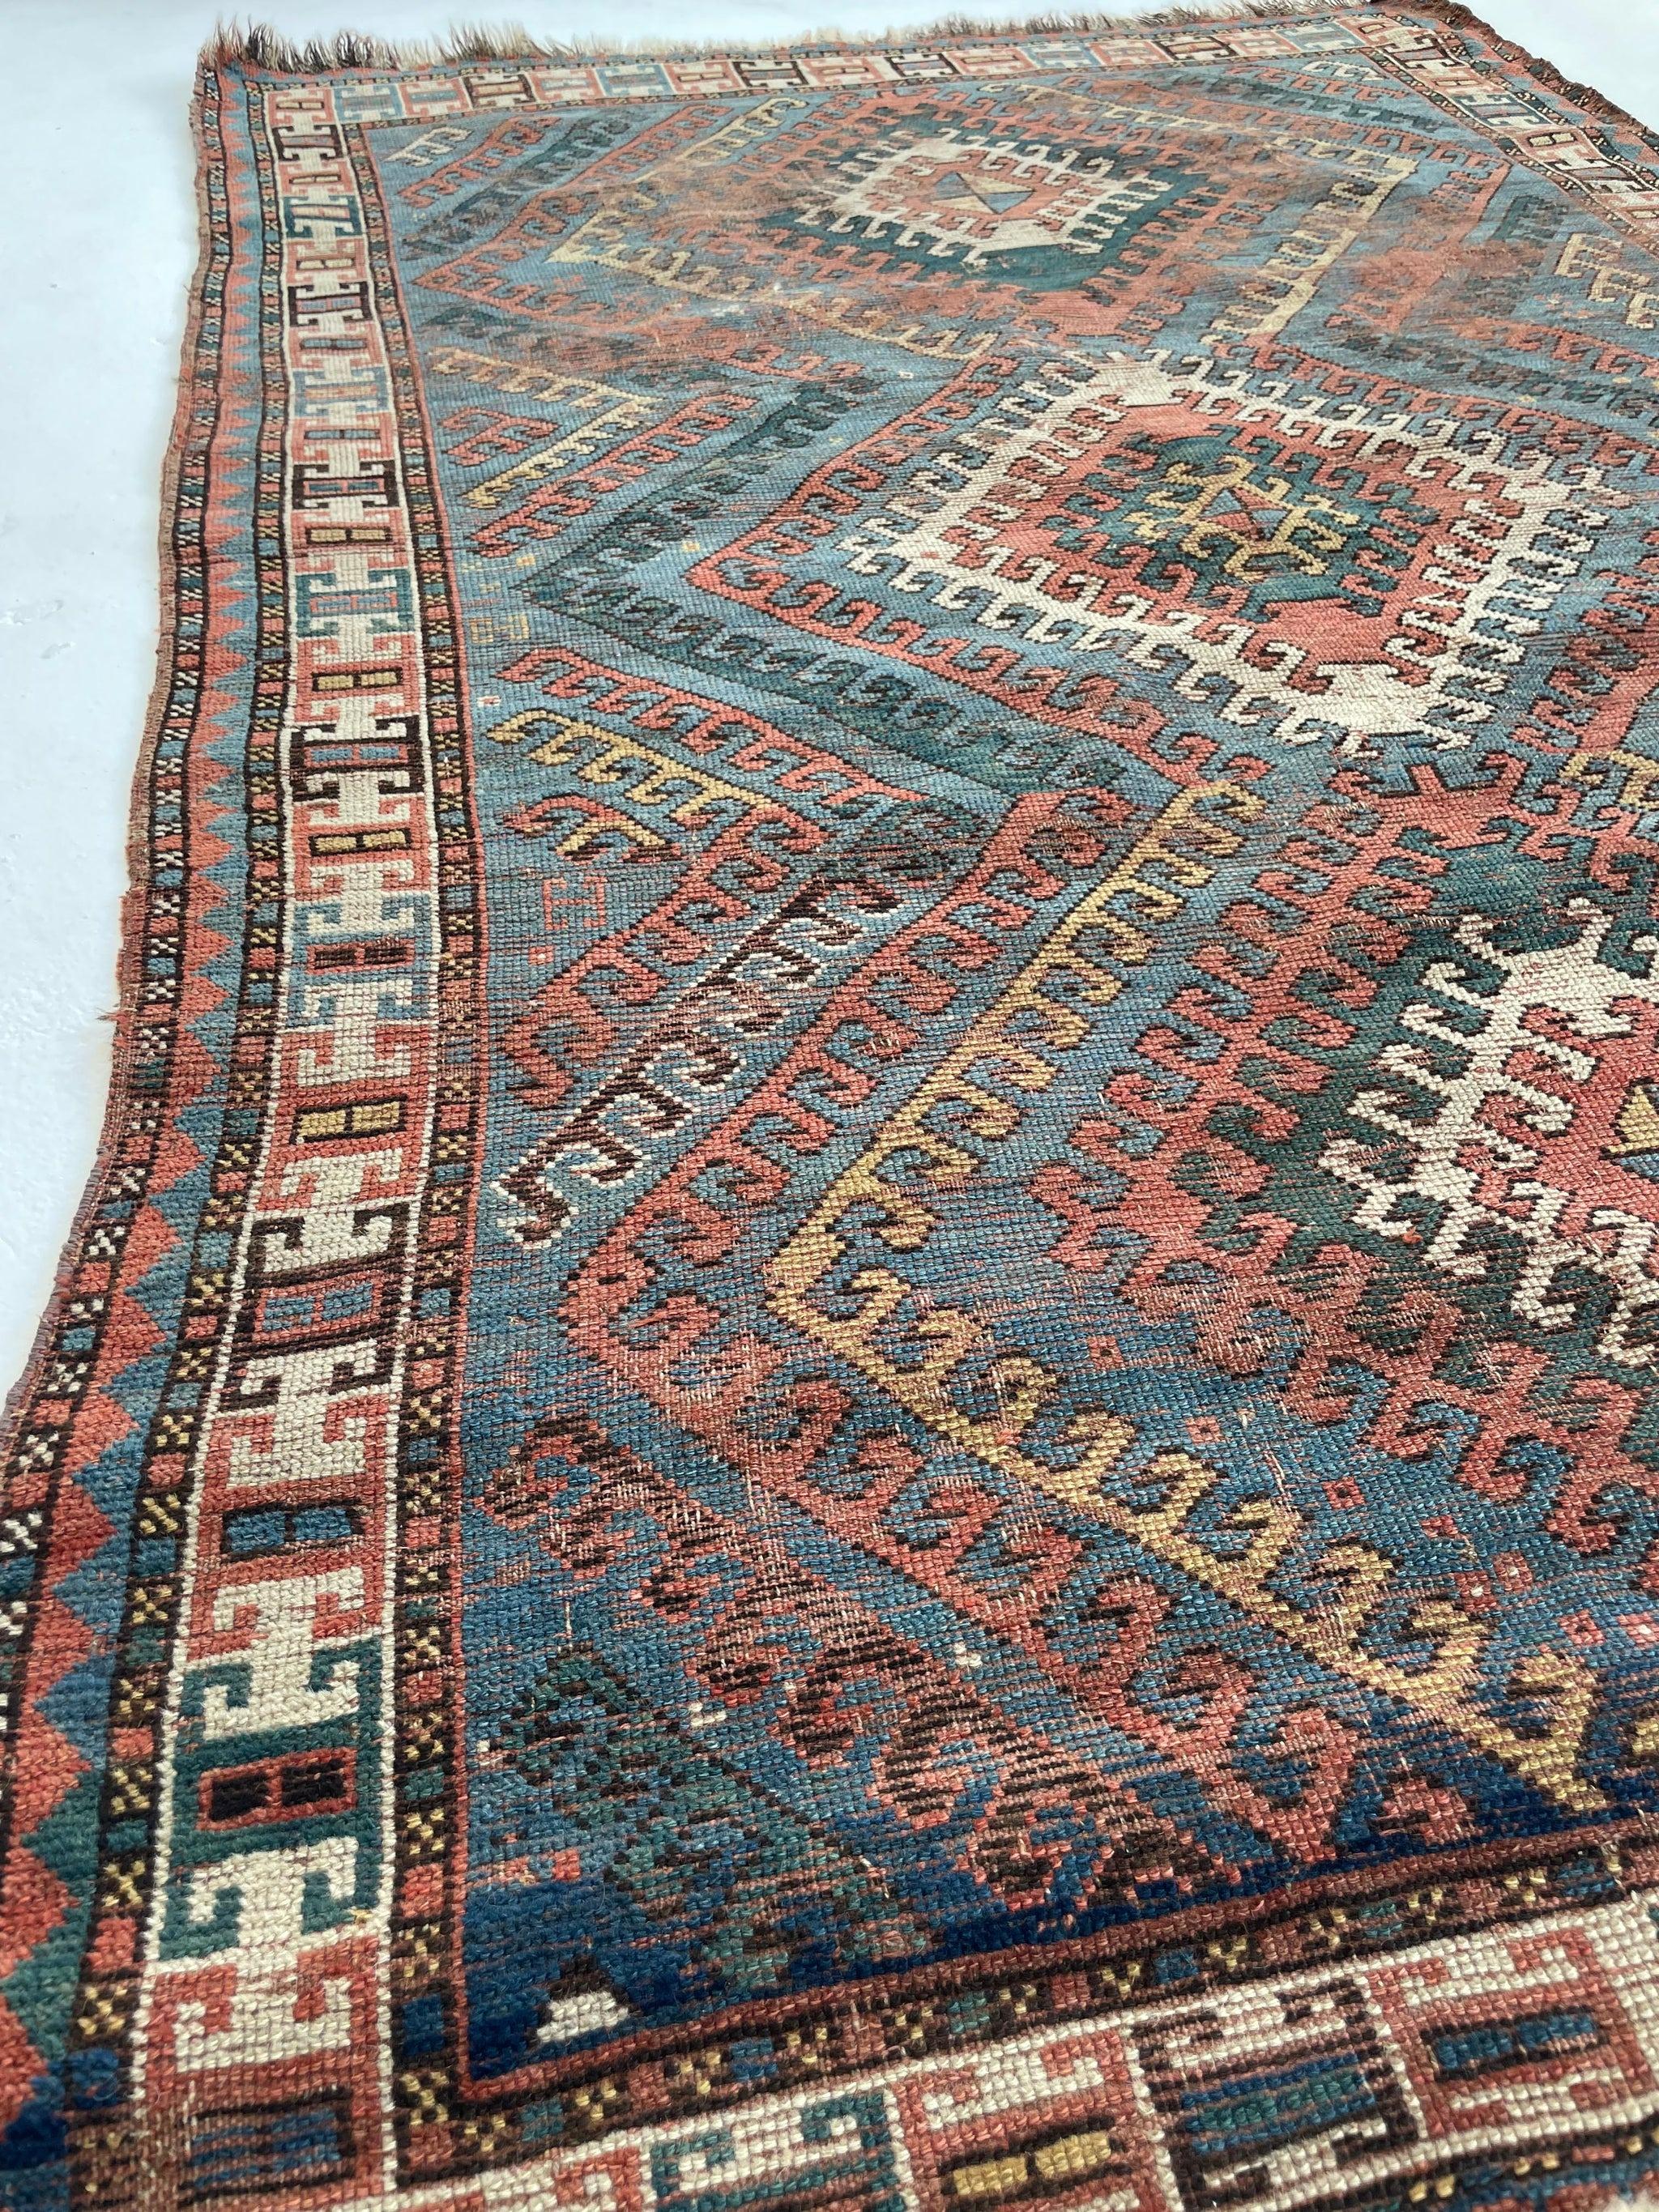 Sensational Sky Blue Antique Caucasian Rug with Ram Horn Outlined Diamonds with Terracotta, Emerald Green, & Wheat Hues

About: This is borderline a collector's item with the very rare sky blue background color - i would say for every 100 rugs